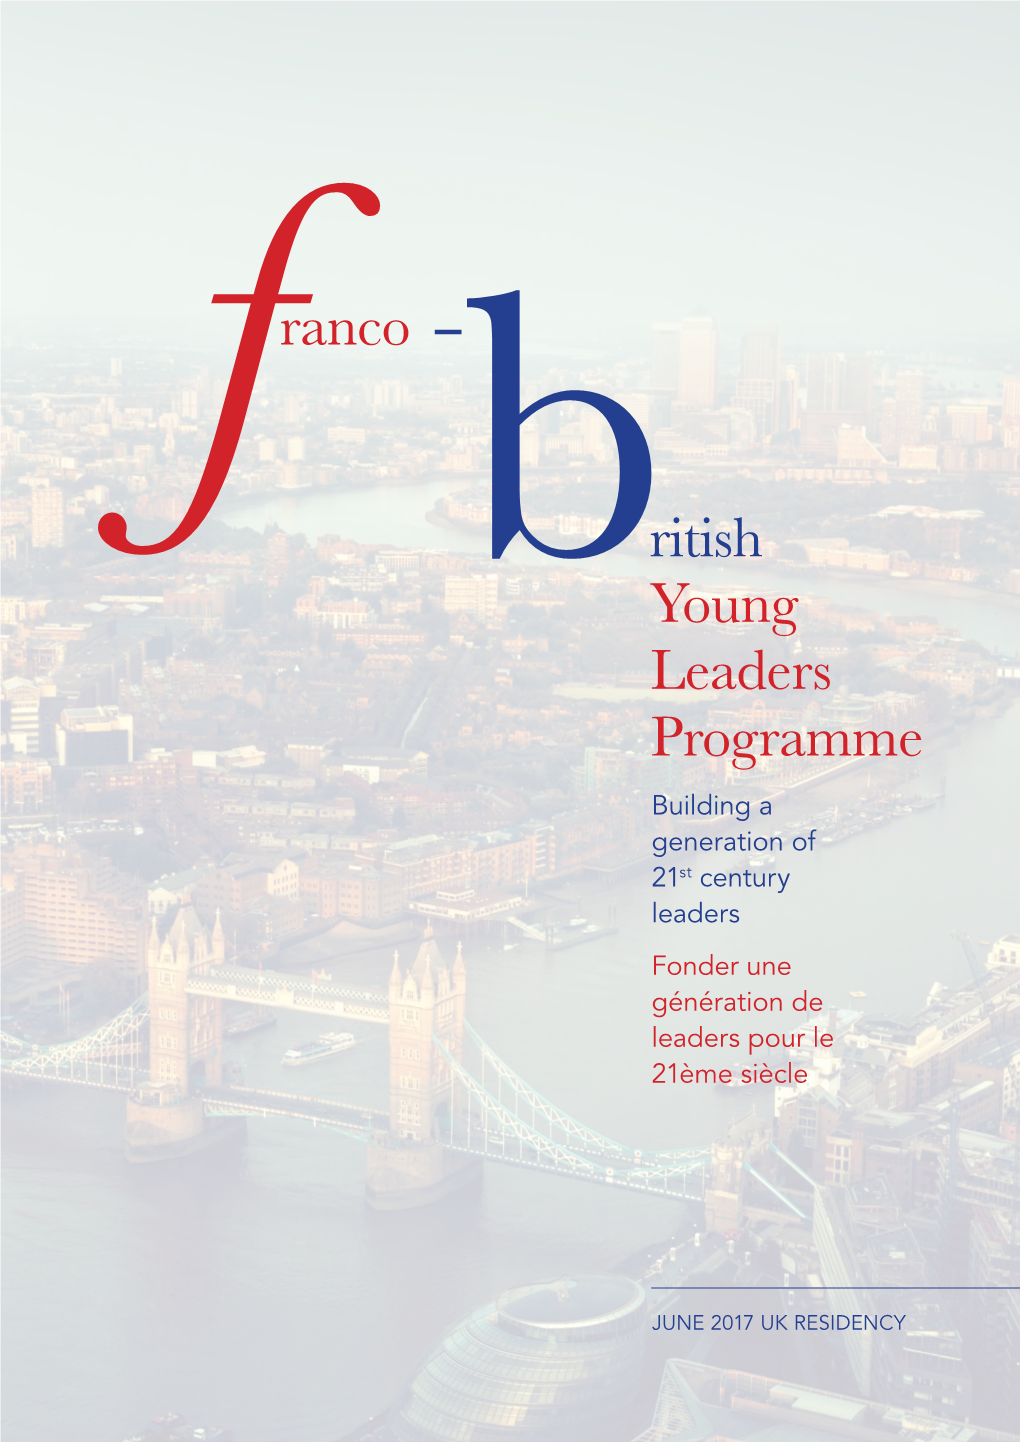 Franco British Young Leaders Programme